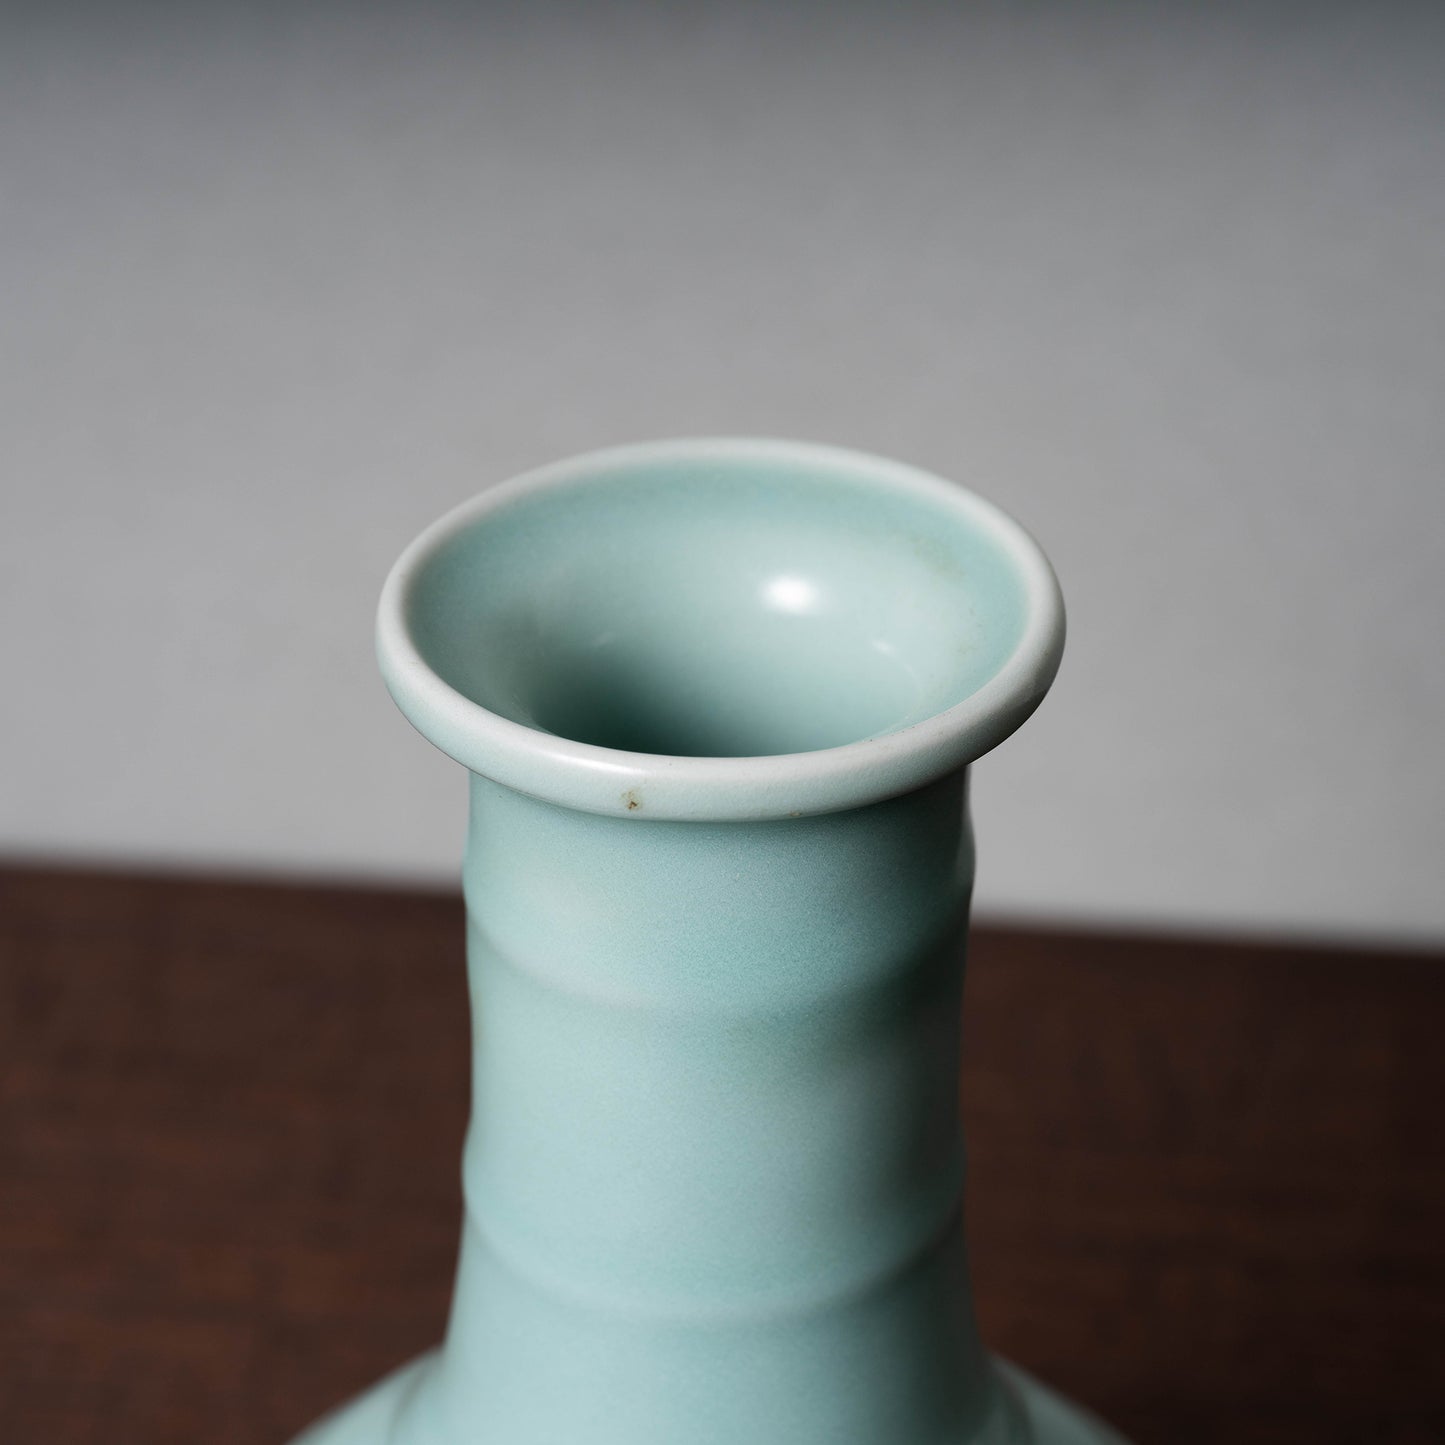 Longquan Celadon Vase with Bamboo Shoots Design